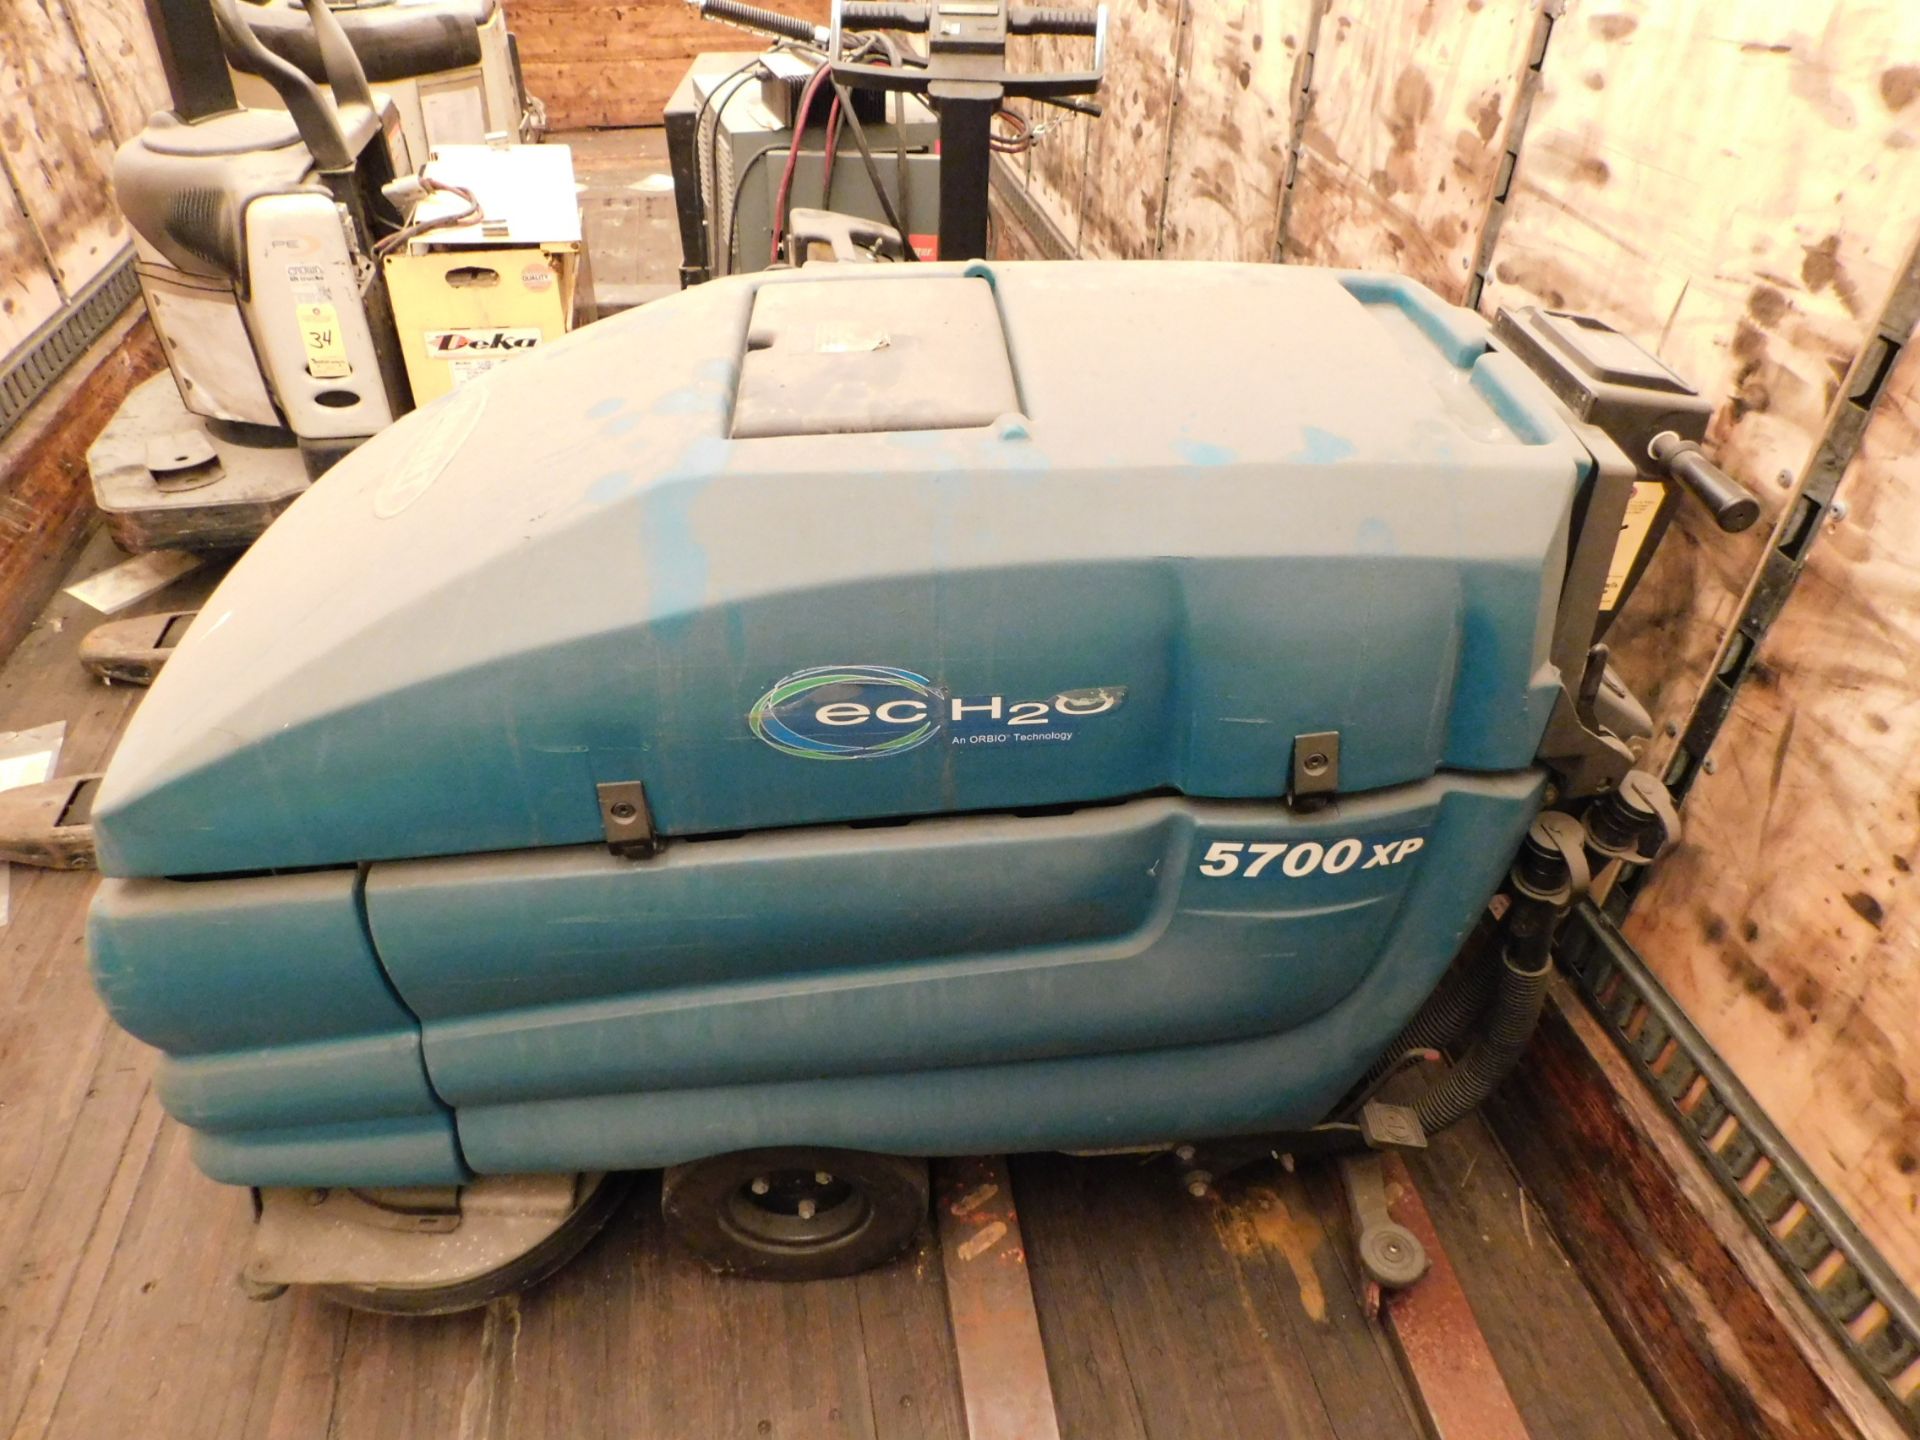 Tennant Model 5700 XP Cylindrical Bruch Floor Scrubber, Location 1 - 1100 Tower Dr., Fort Loramie,